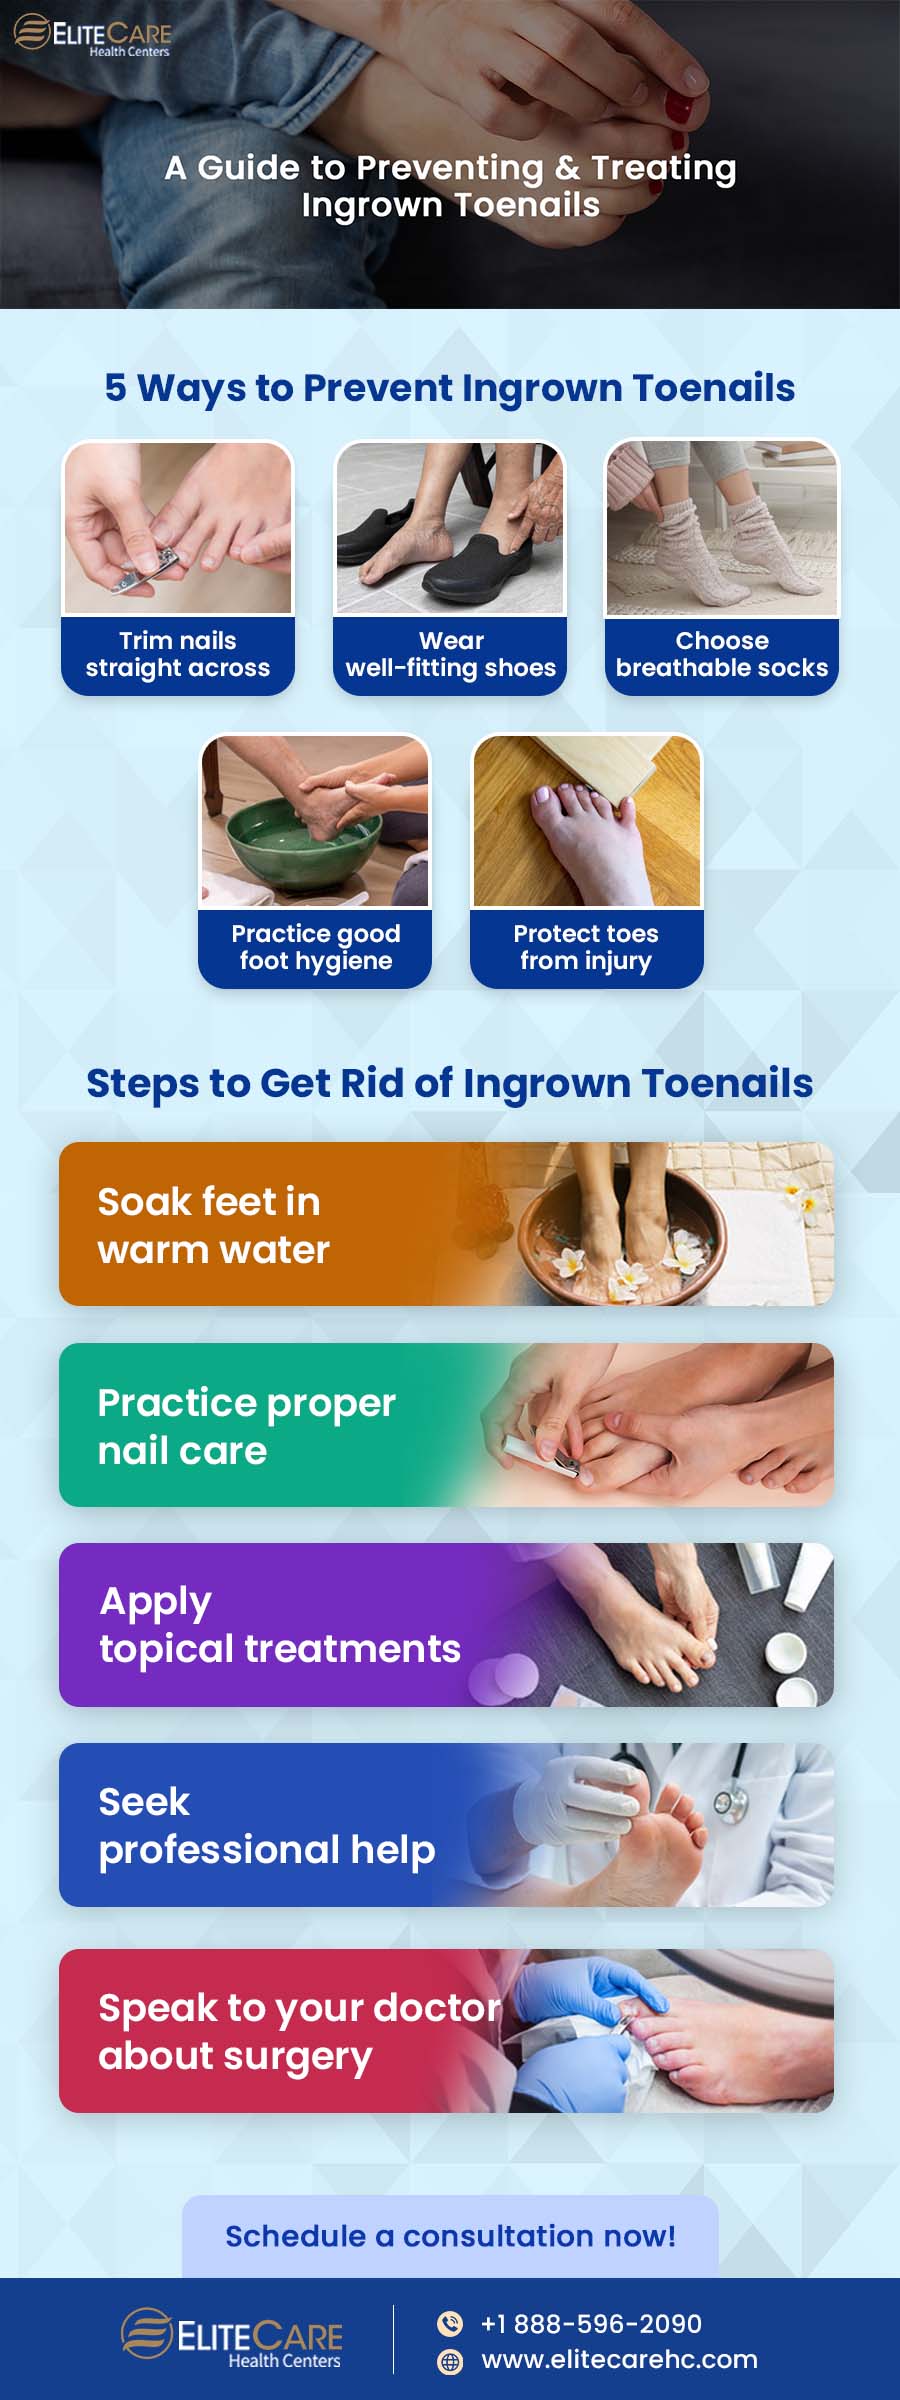 A Guide to Preventing & Treating Ingrown Toenails | Infographic